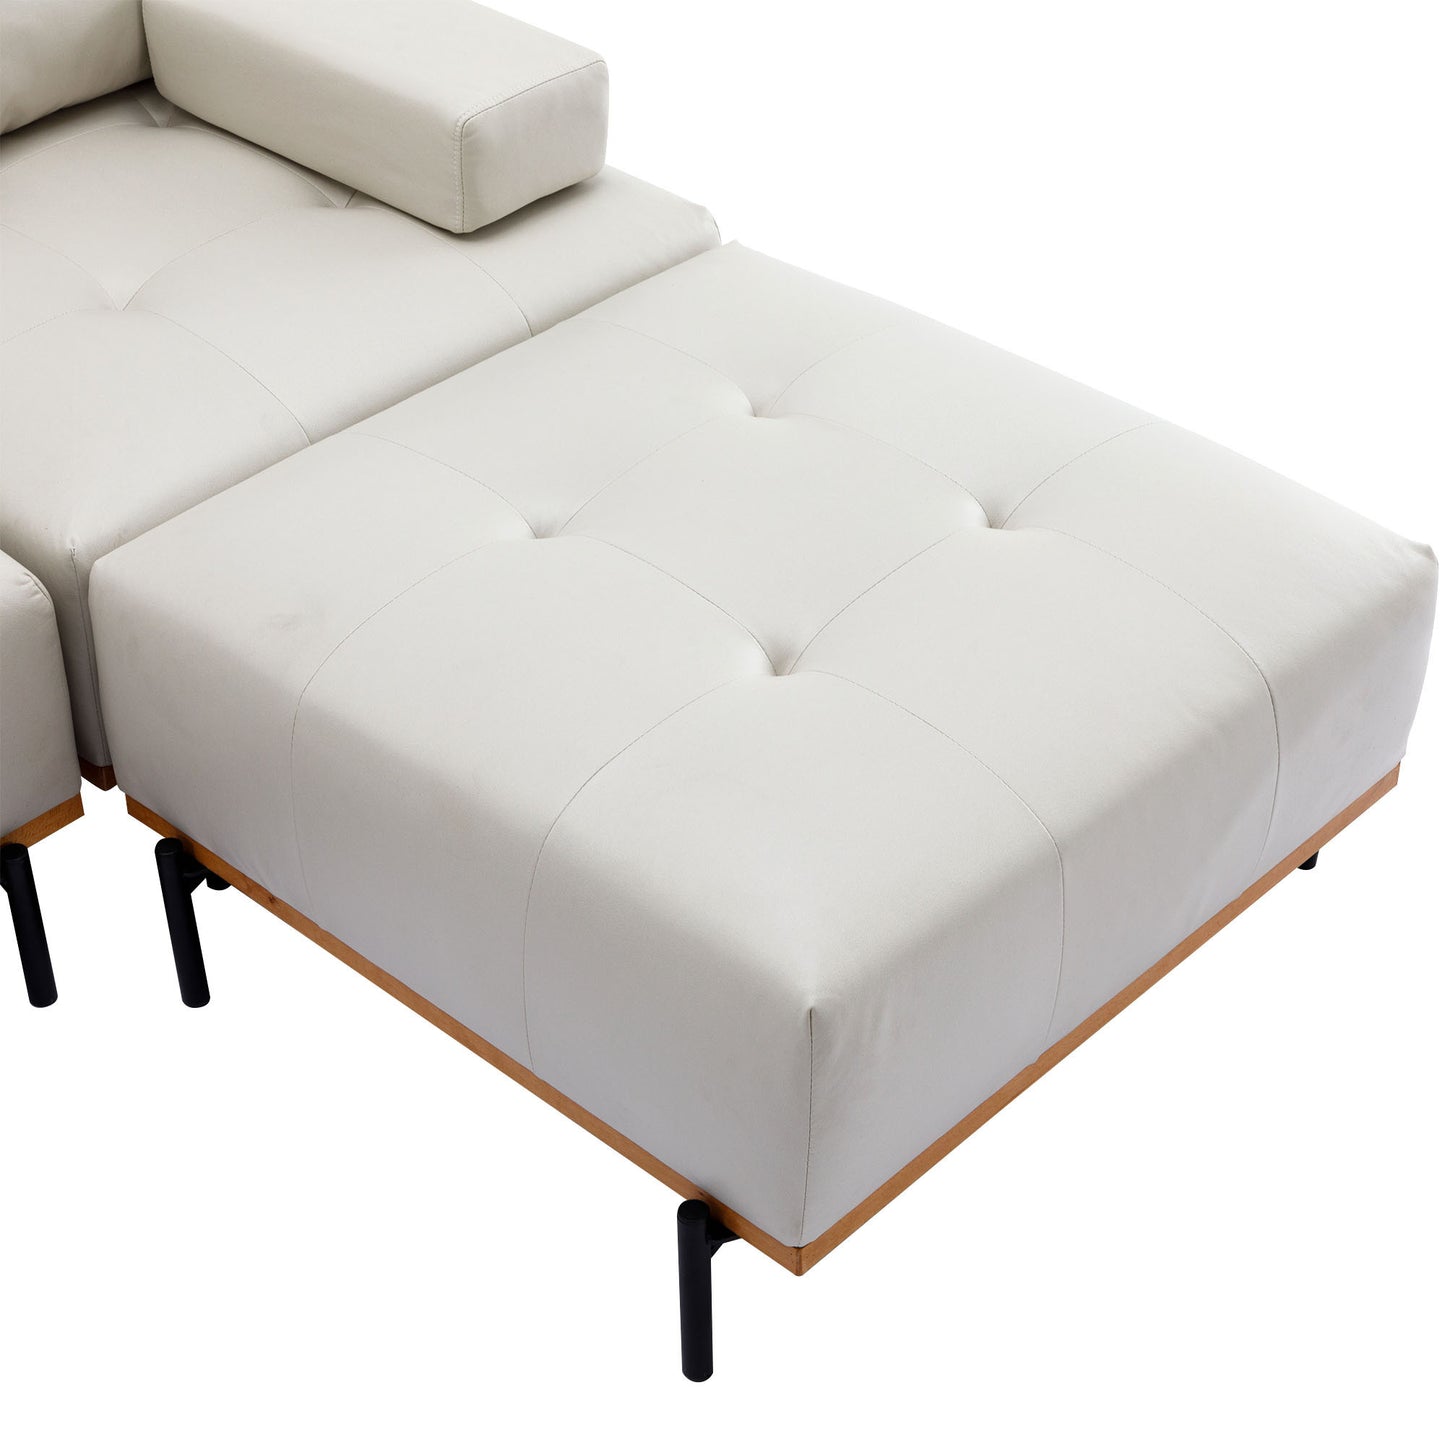 L-Shape Sectional Sofa 3-Seater Couches with a Removable Ottoman, Comfortable Fabric for Living Room, Apartment, Beige